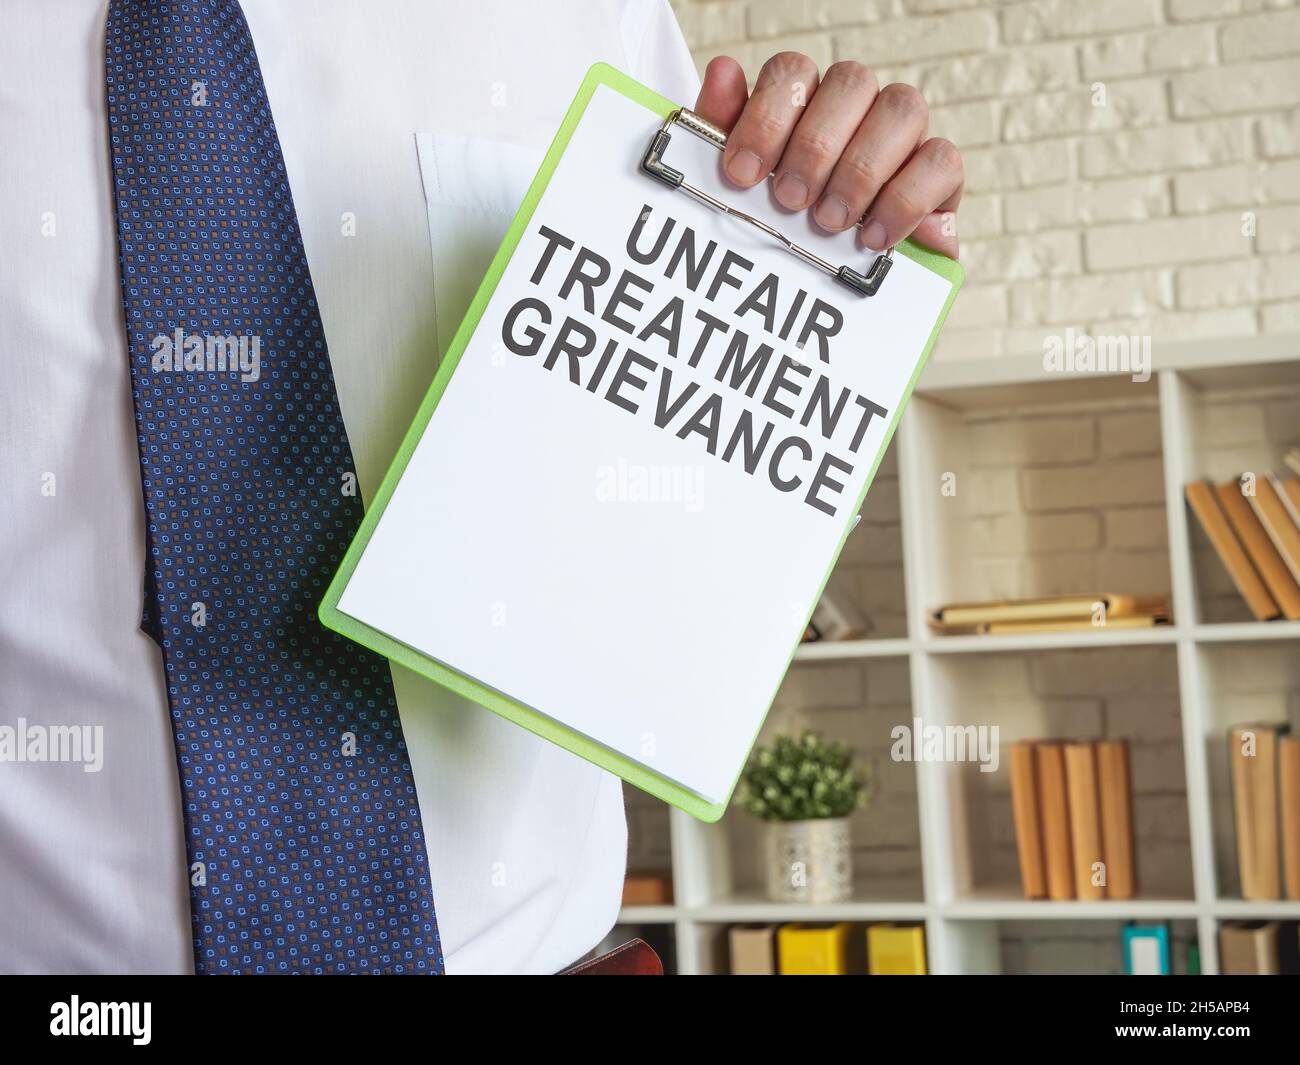 Unfair treatment grievance with clipboard in the hands. Stock Photo